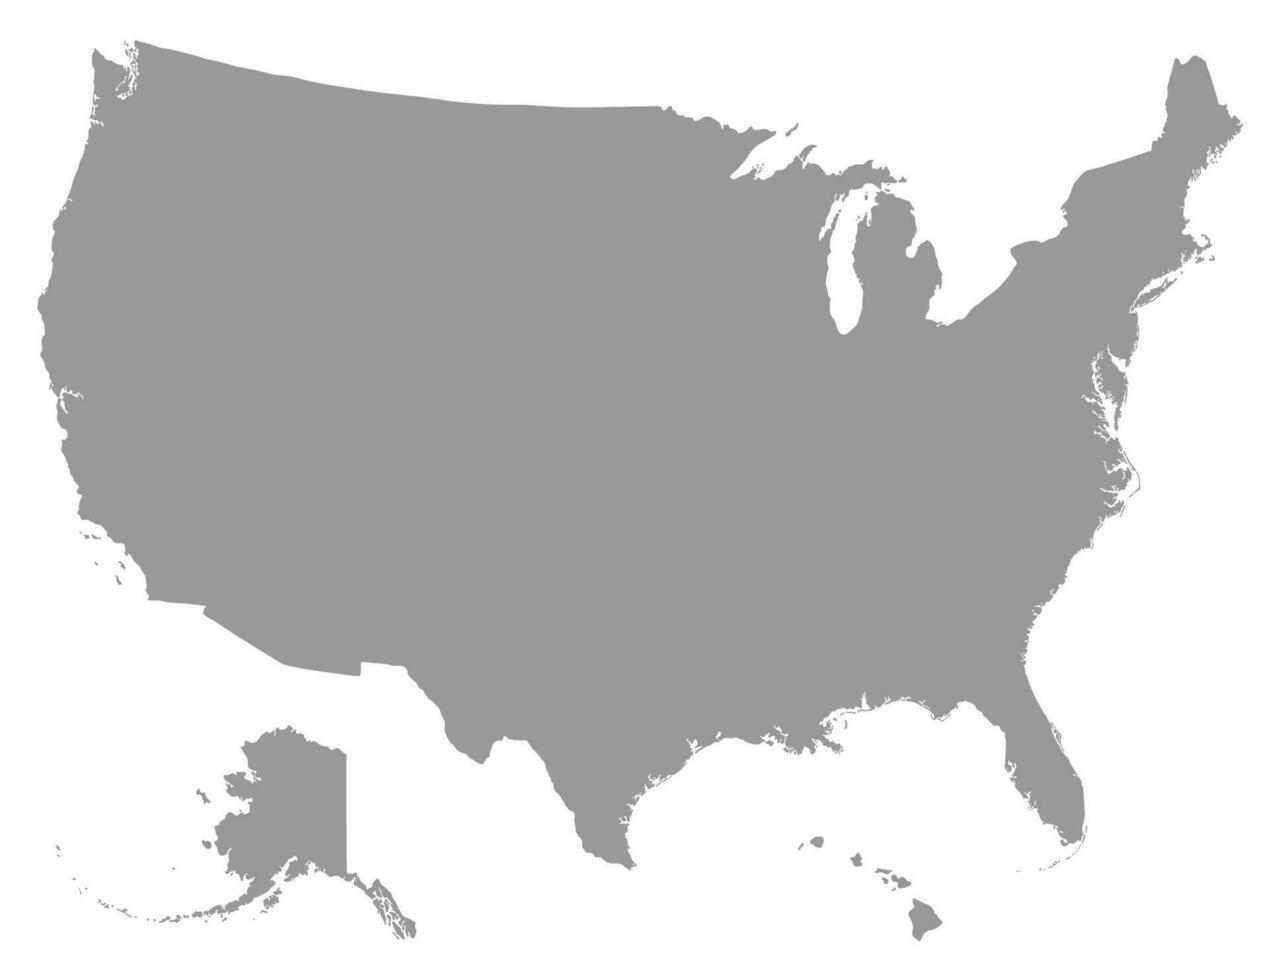 USA map, America map, United States of America map isolated on grey color vector